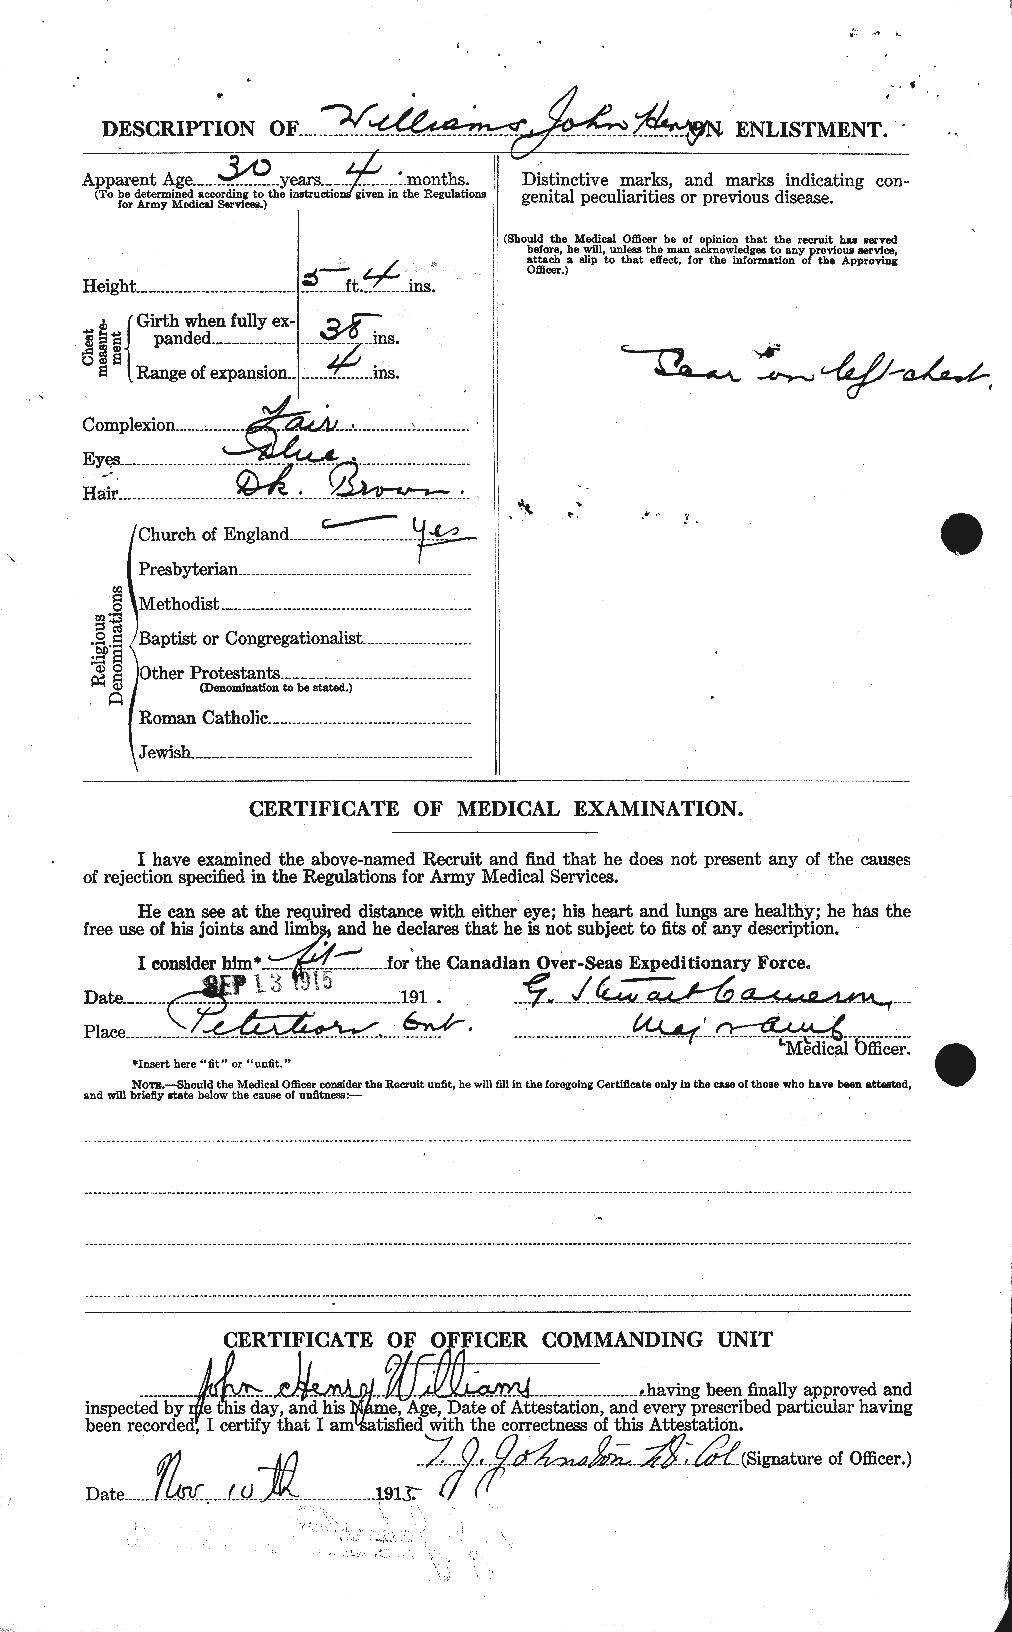 Personnel Records of the First World War - CEF 673002b